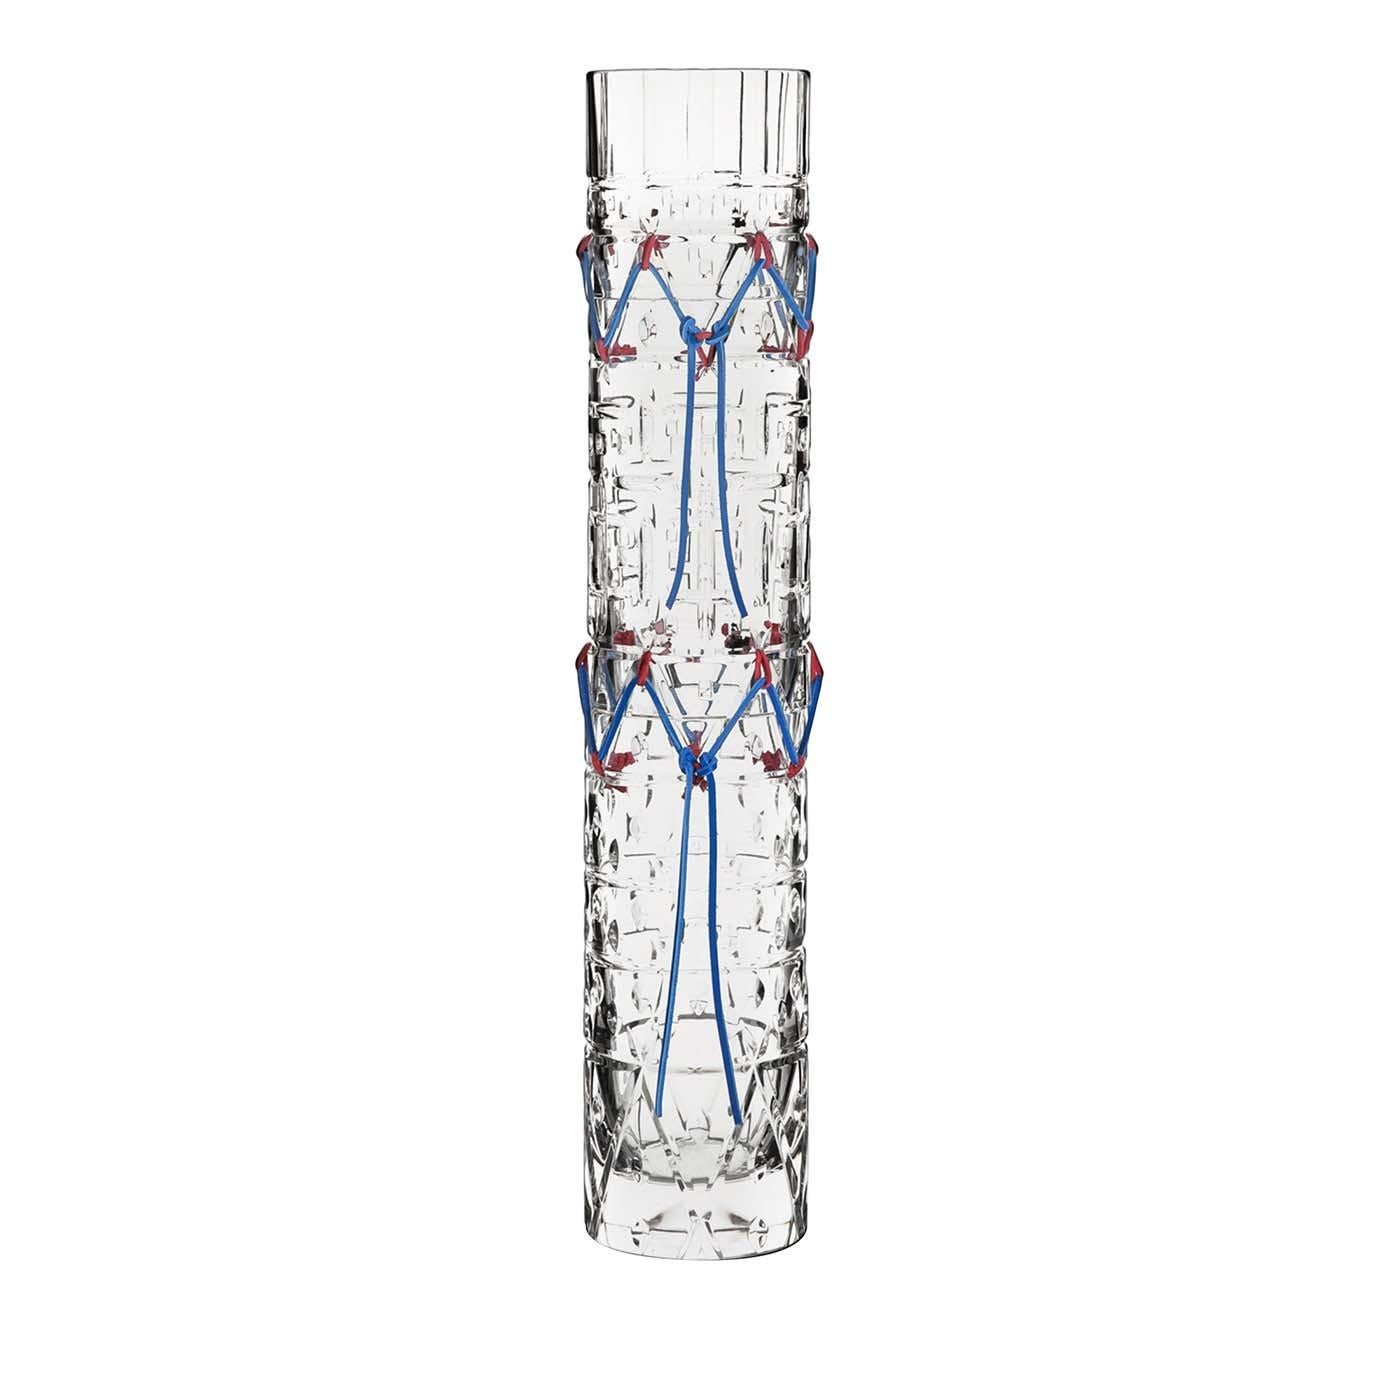 An elegant homage to the iconic aesthetic distinctive of the Native American culture, this vase is crafted of transparent crystal using traditional Italian methods, creating a superb mix of two different sensibilities. The elongated conical shape of